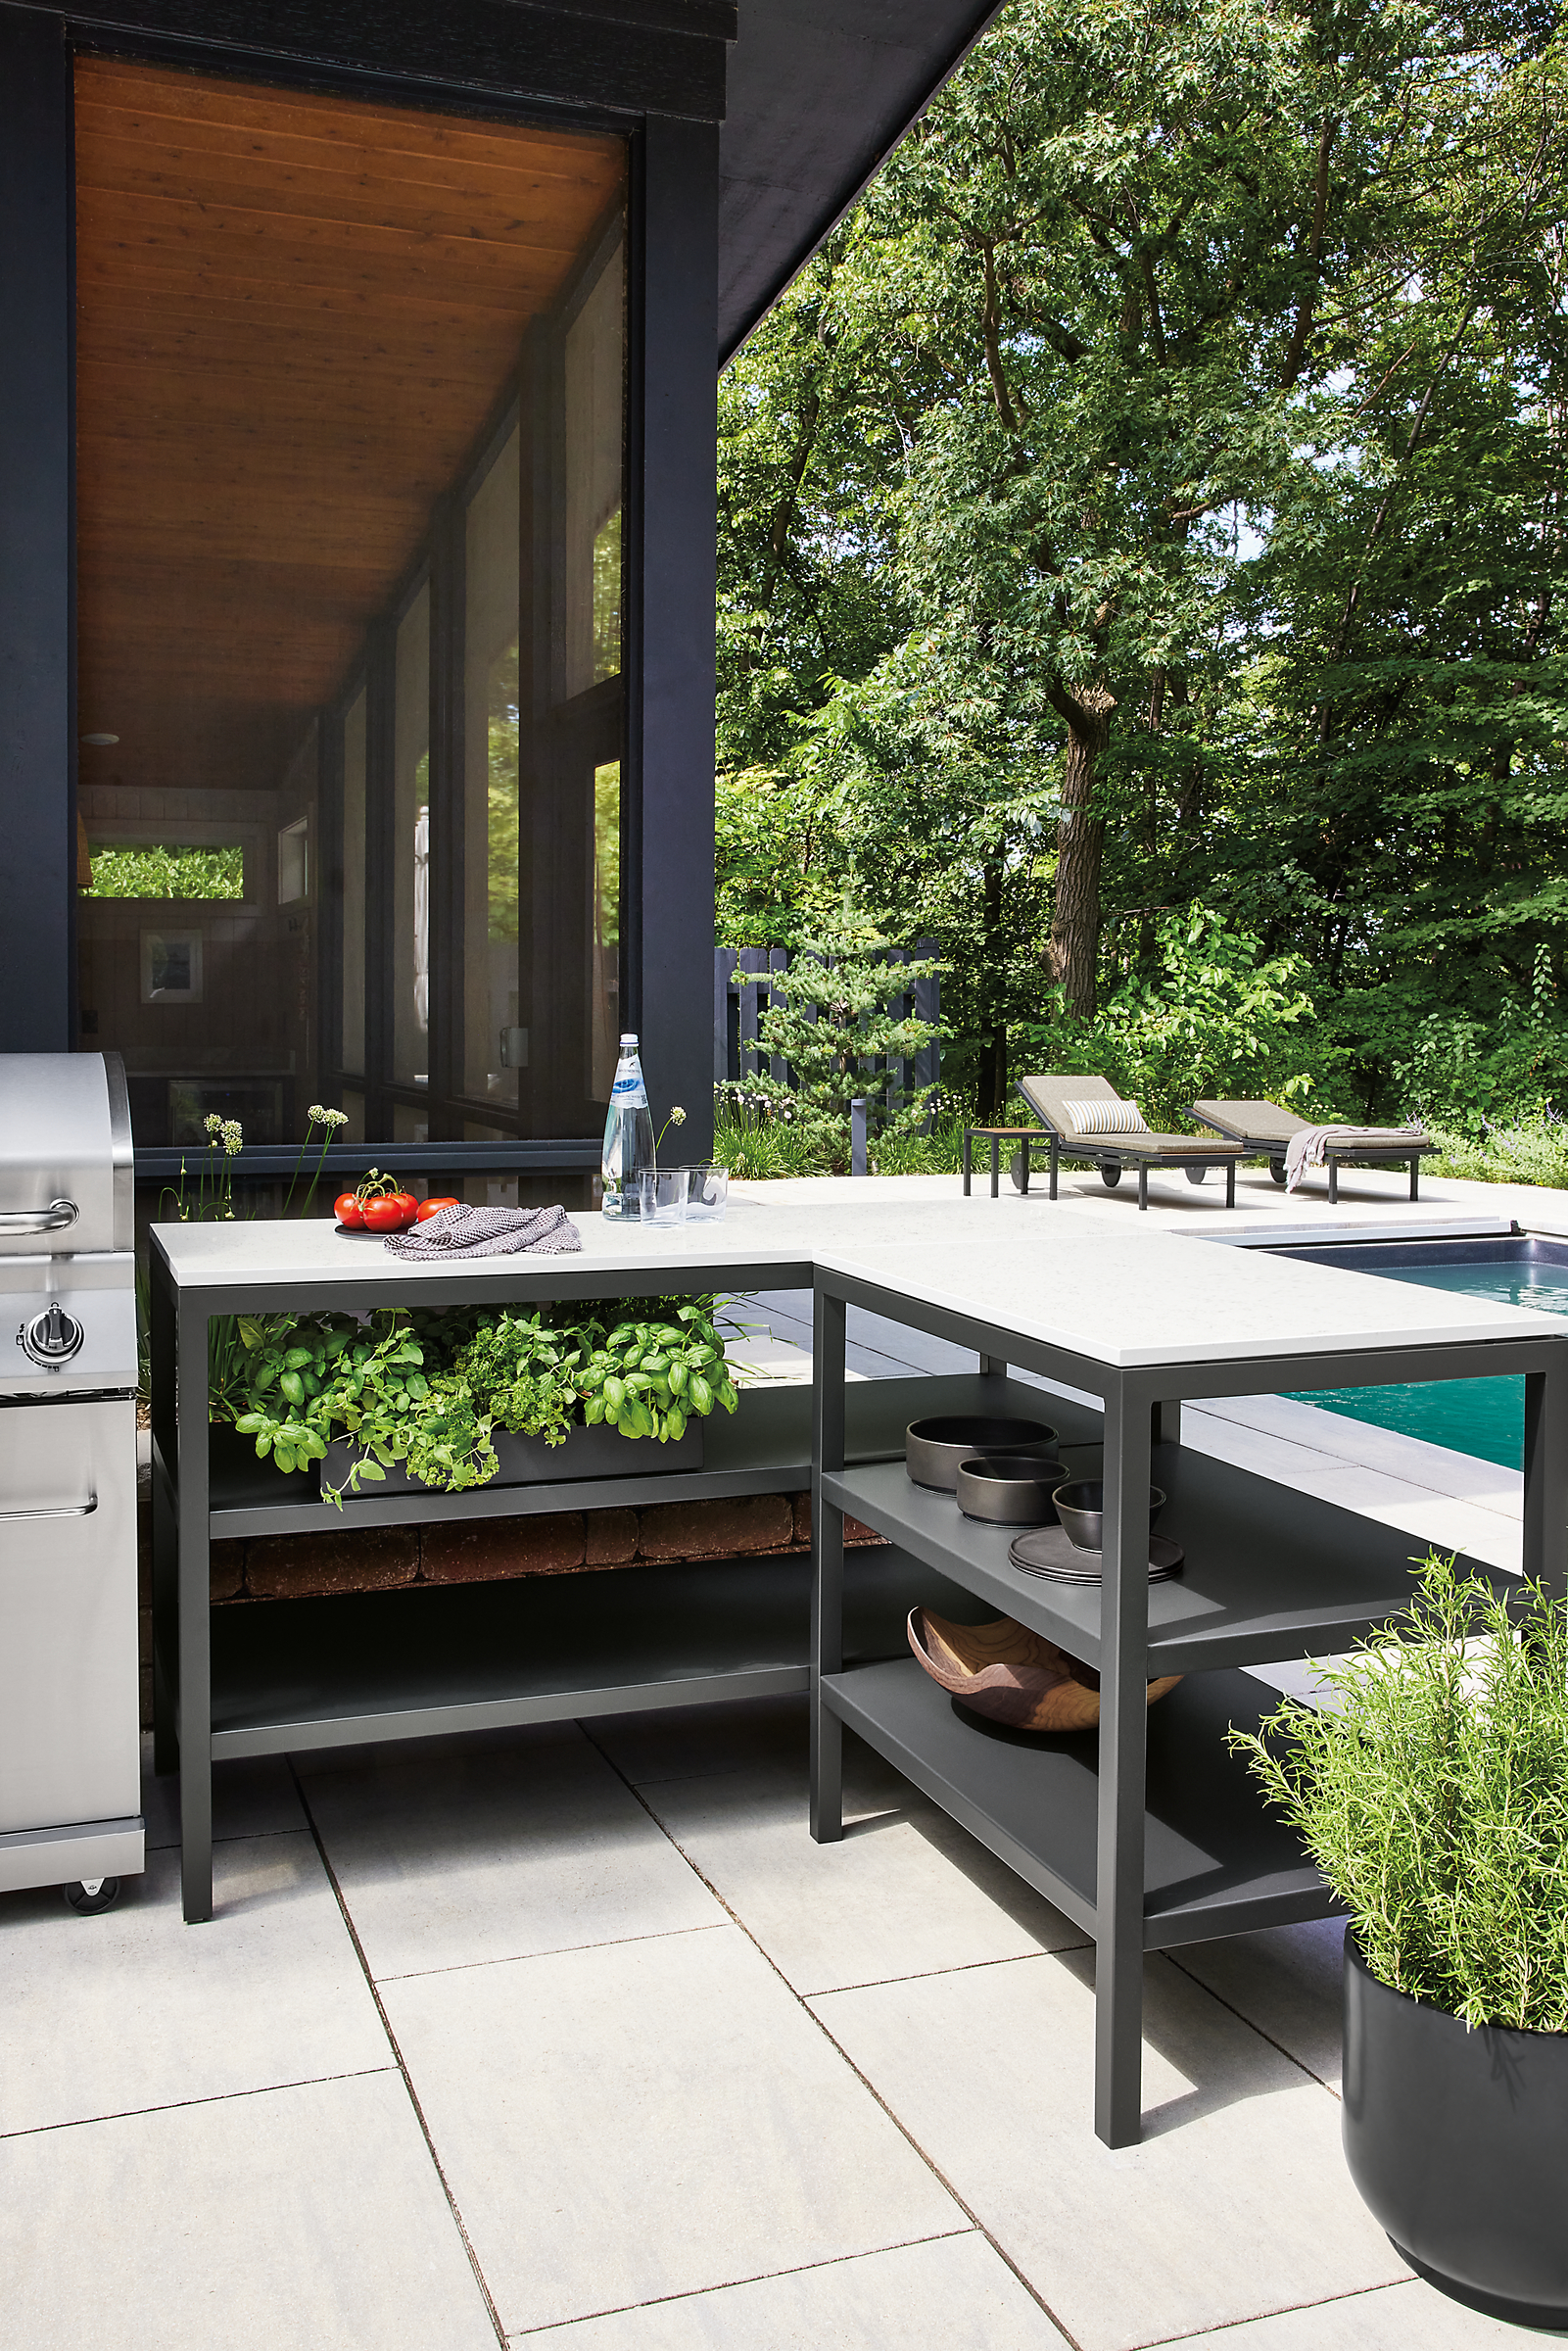 Outdoor space with parsons counter L-shaped table and lots of basil on one shelf.